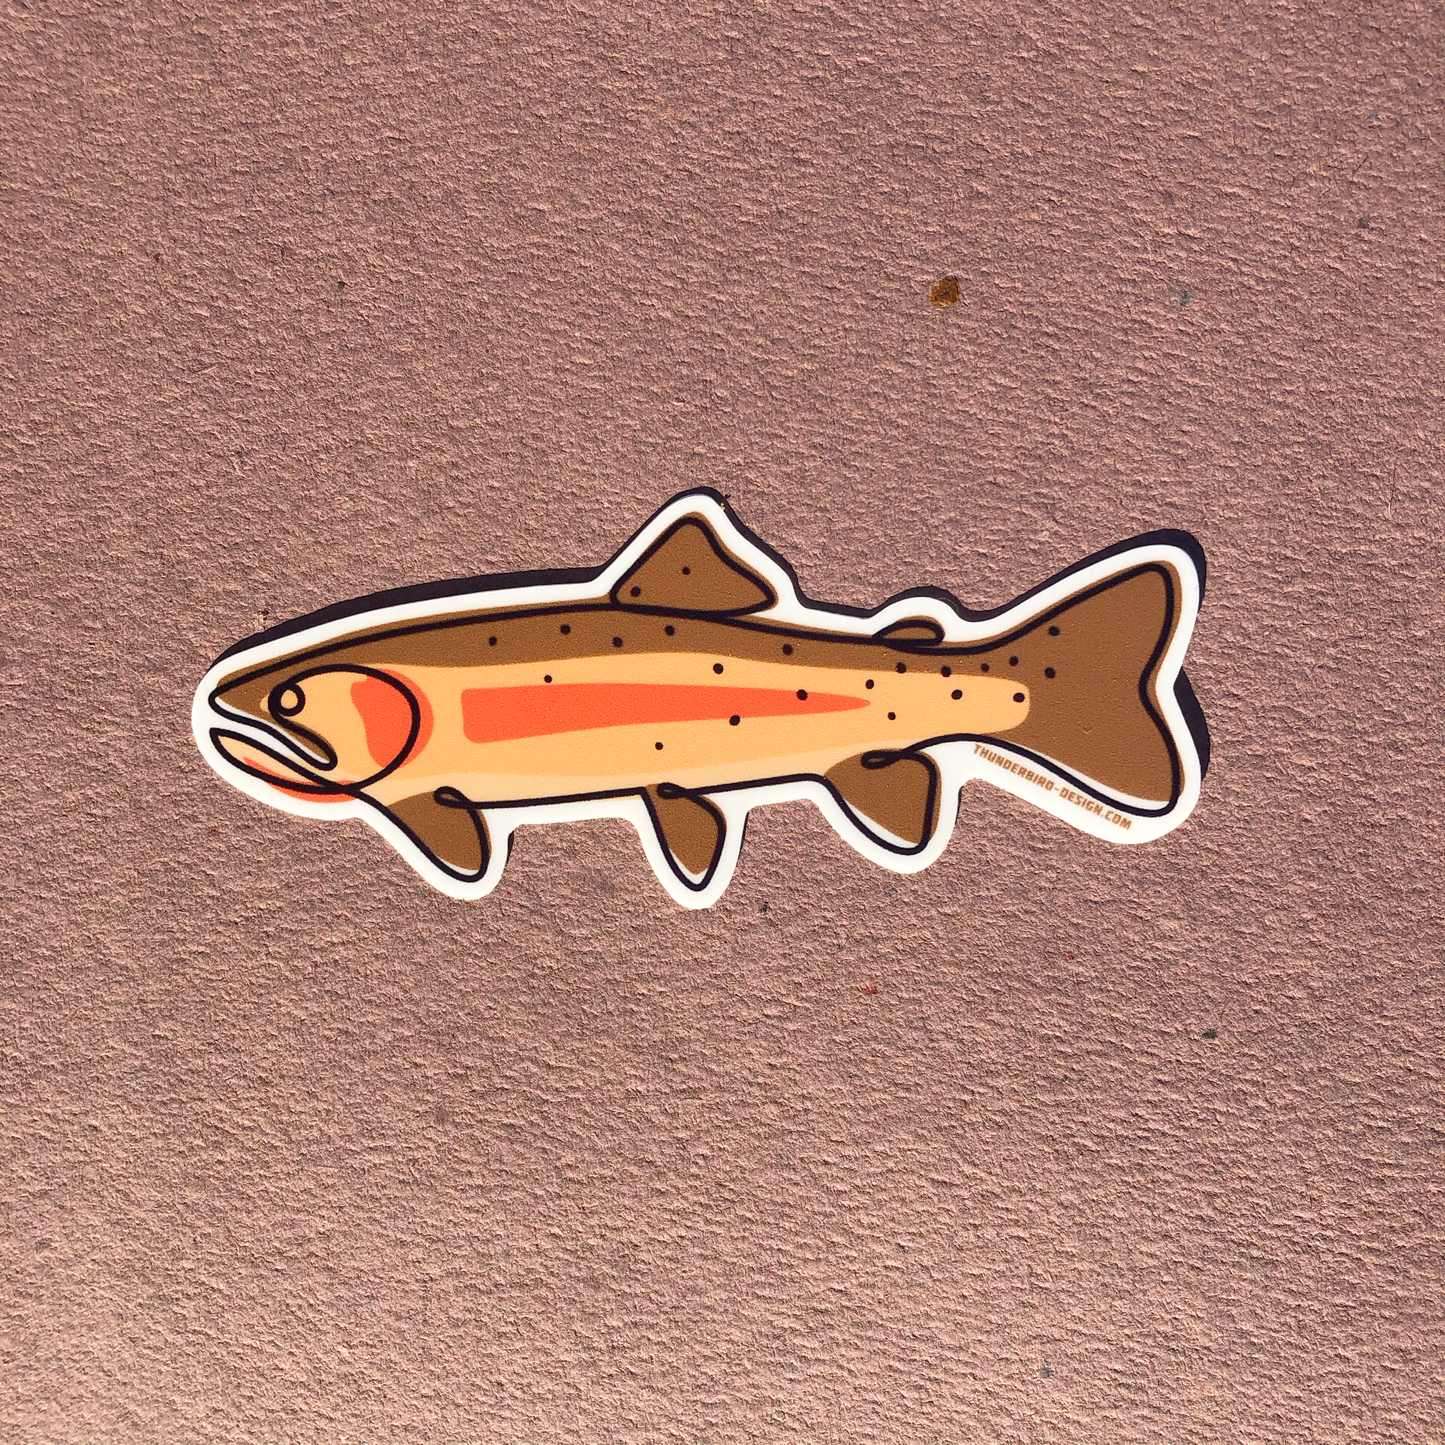 Cutthroat Trout -Single Line Series Decal w/ Matte Finish